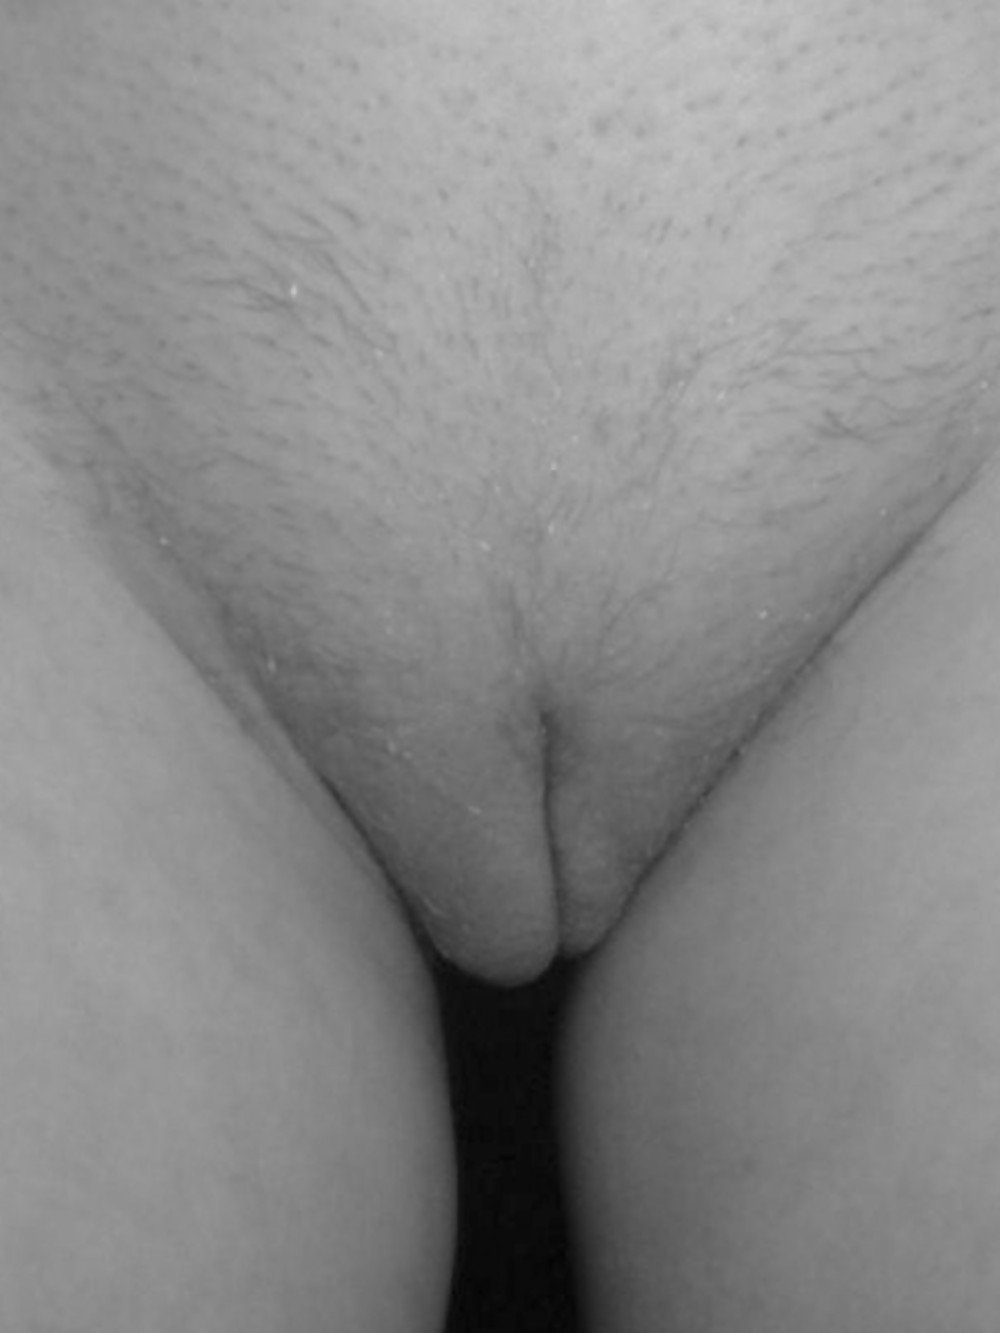 Black and white pussy closeups #4874977